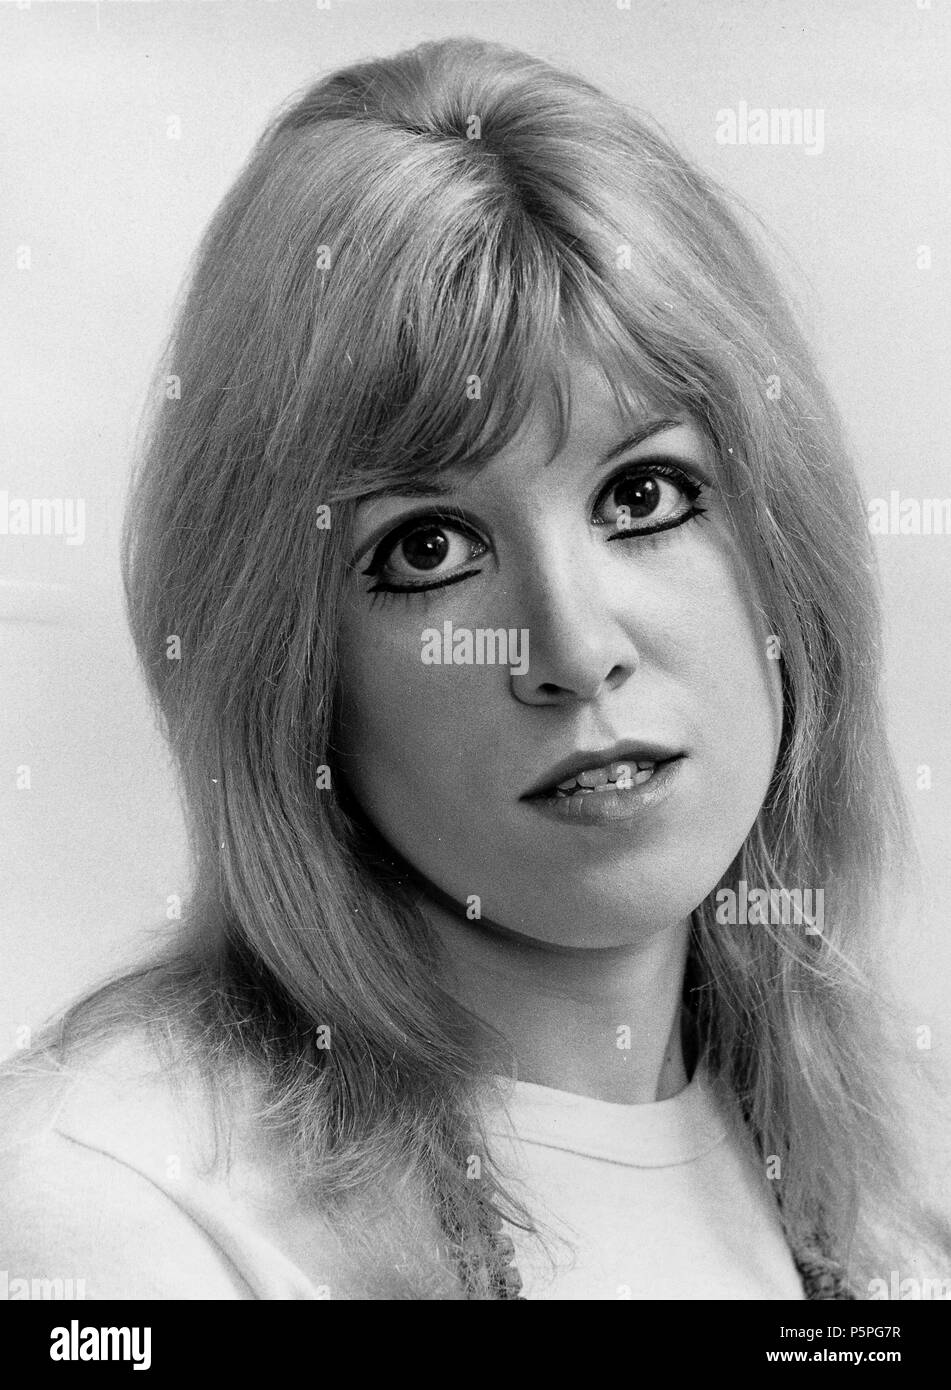 polly brown, pickettywitch, 70s Stock Photo